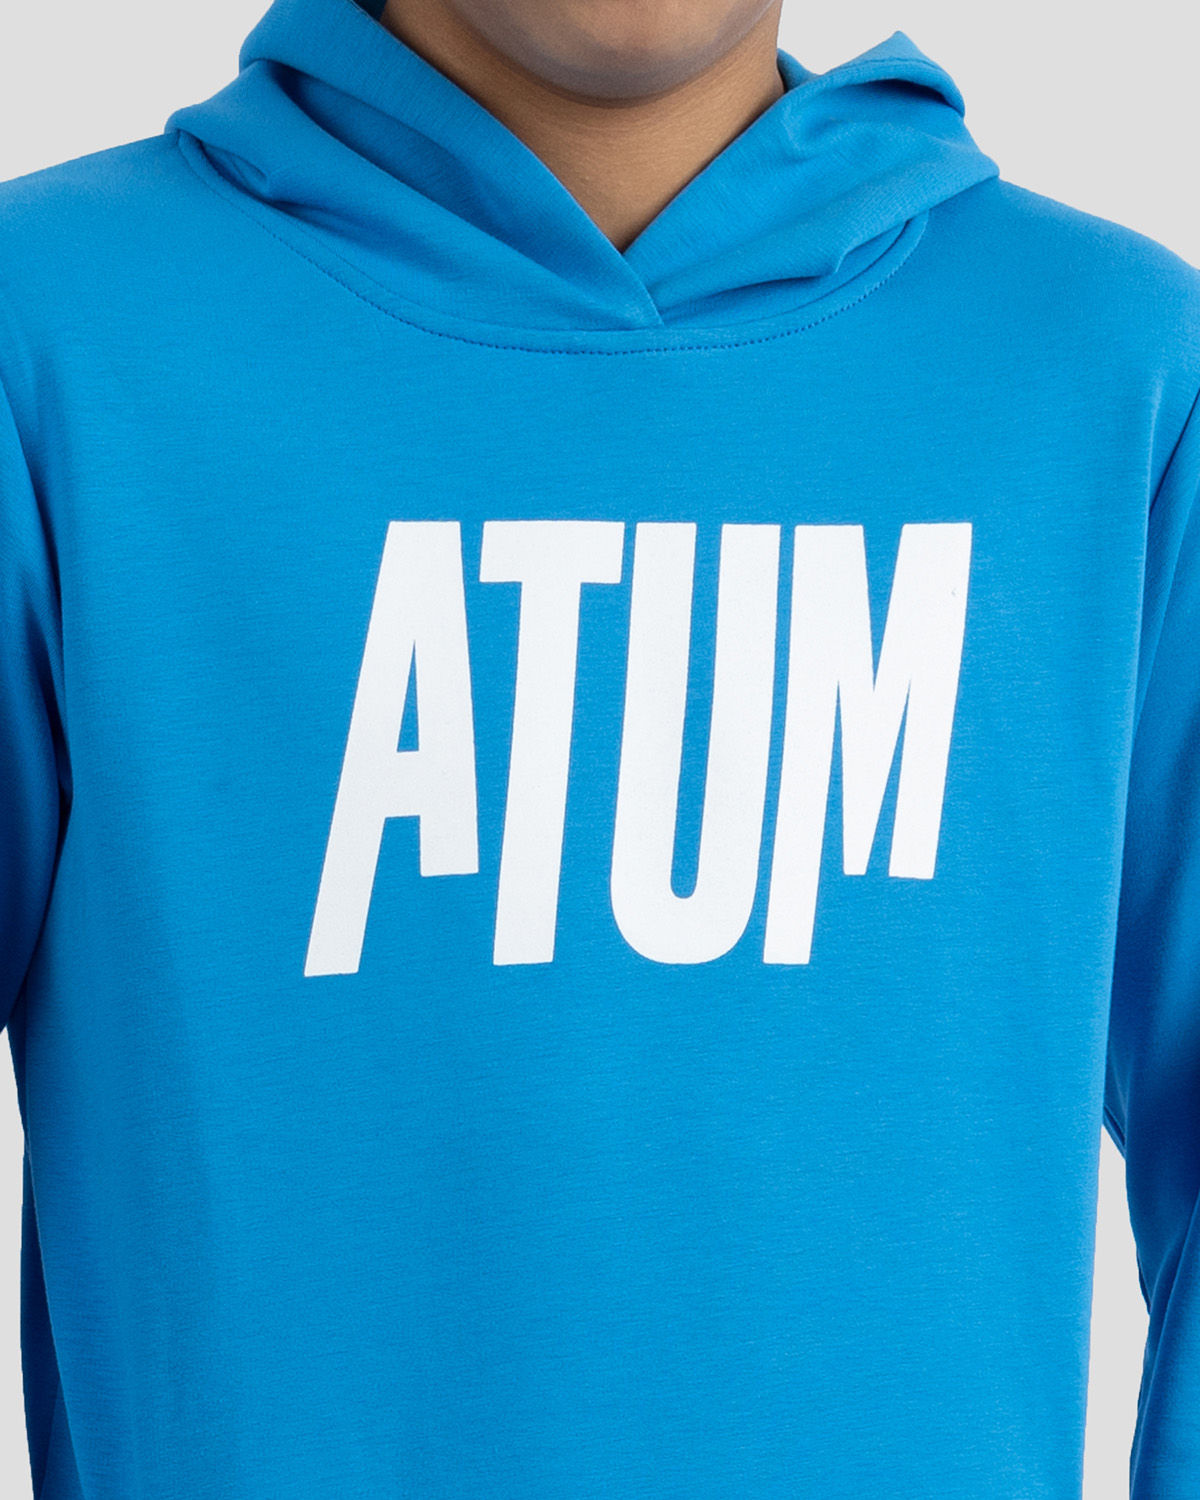 Photo by 𝗔𝗧𝗨ð�— SPORTSWEAR ® on December 20, 2022. May be an image of 1 boy wears a blue sweatshirt and a text said '' Atum''.